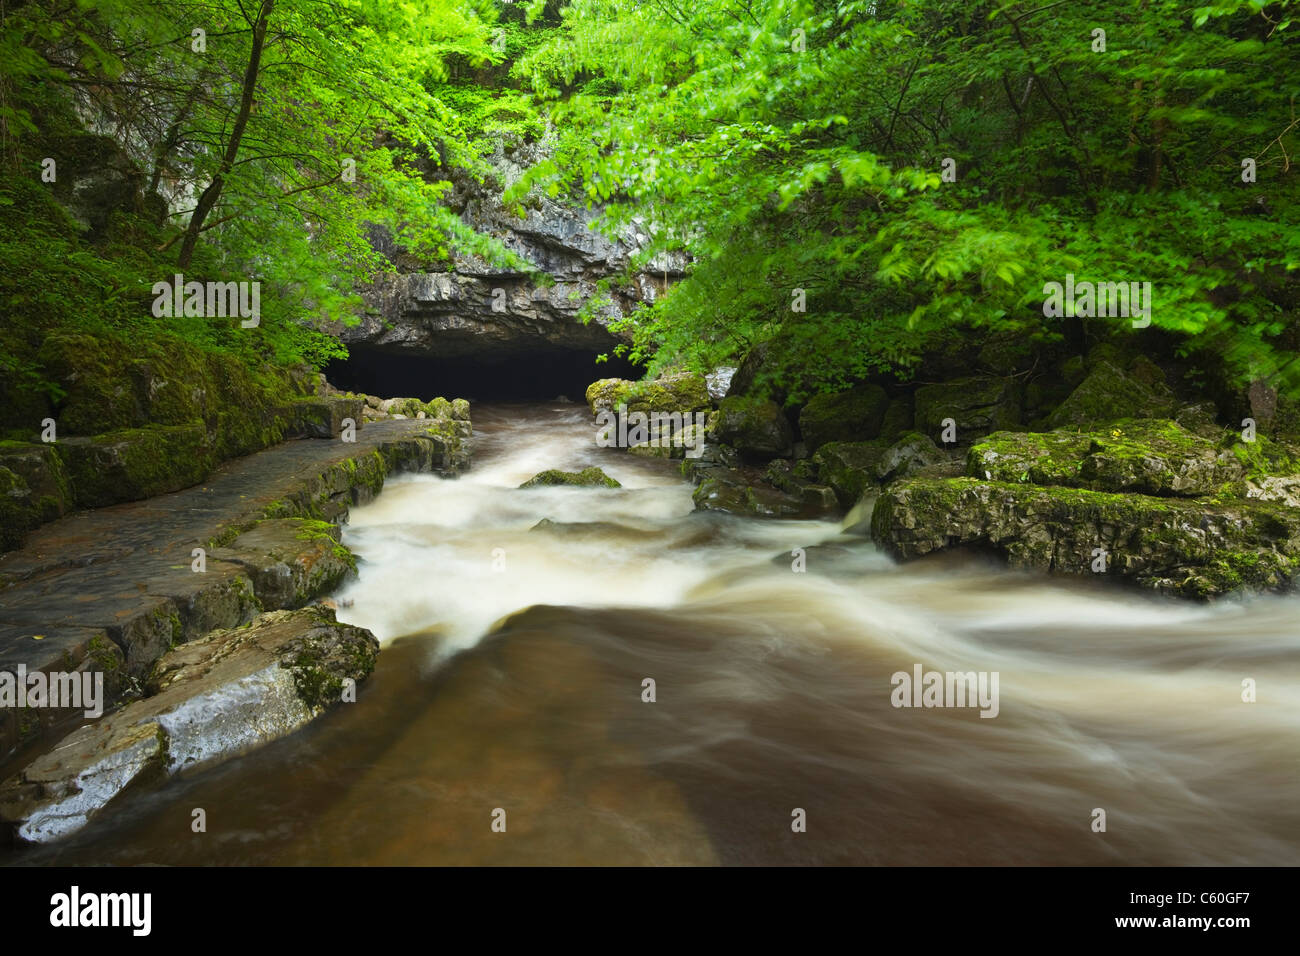 River Mellte flowing into Porth yr Ogof Cave Near Ystradfellte. Brecon Beacons National Park. Powys. Wales. UK. Stock Photo